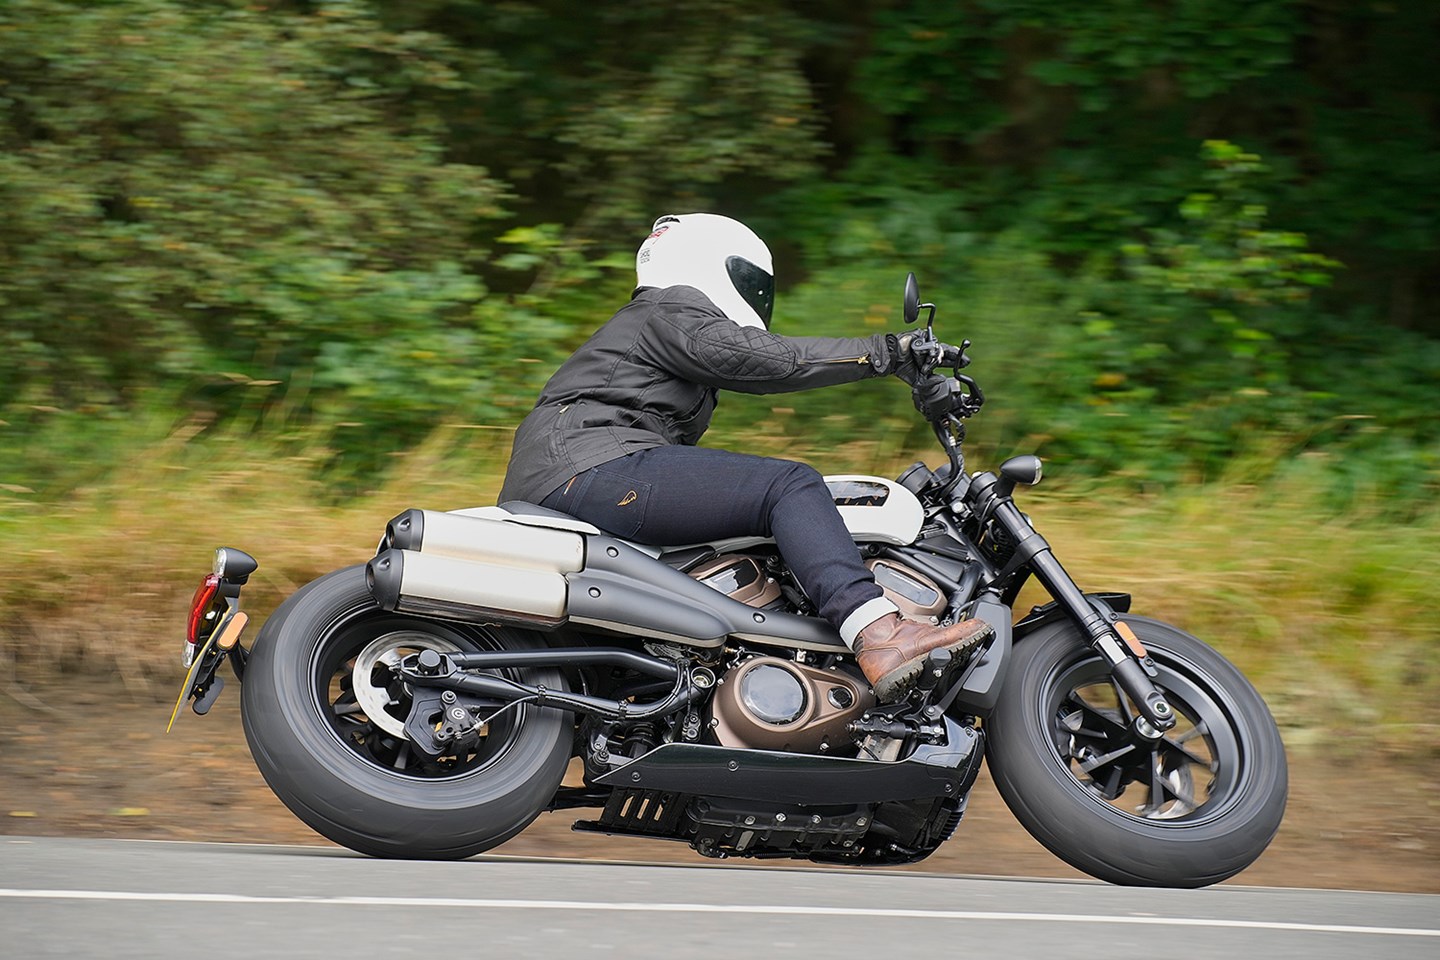 2021 Harley-Davidson Sportster S First Ride Review - Canada Moto Guide